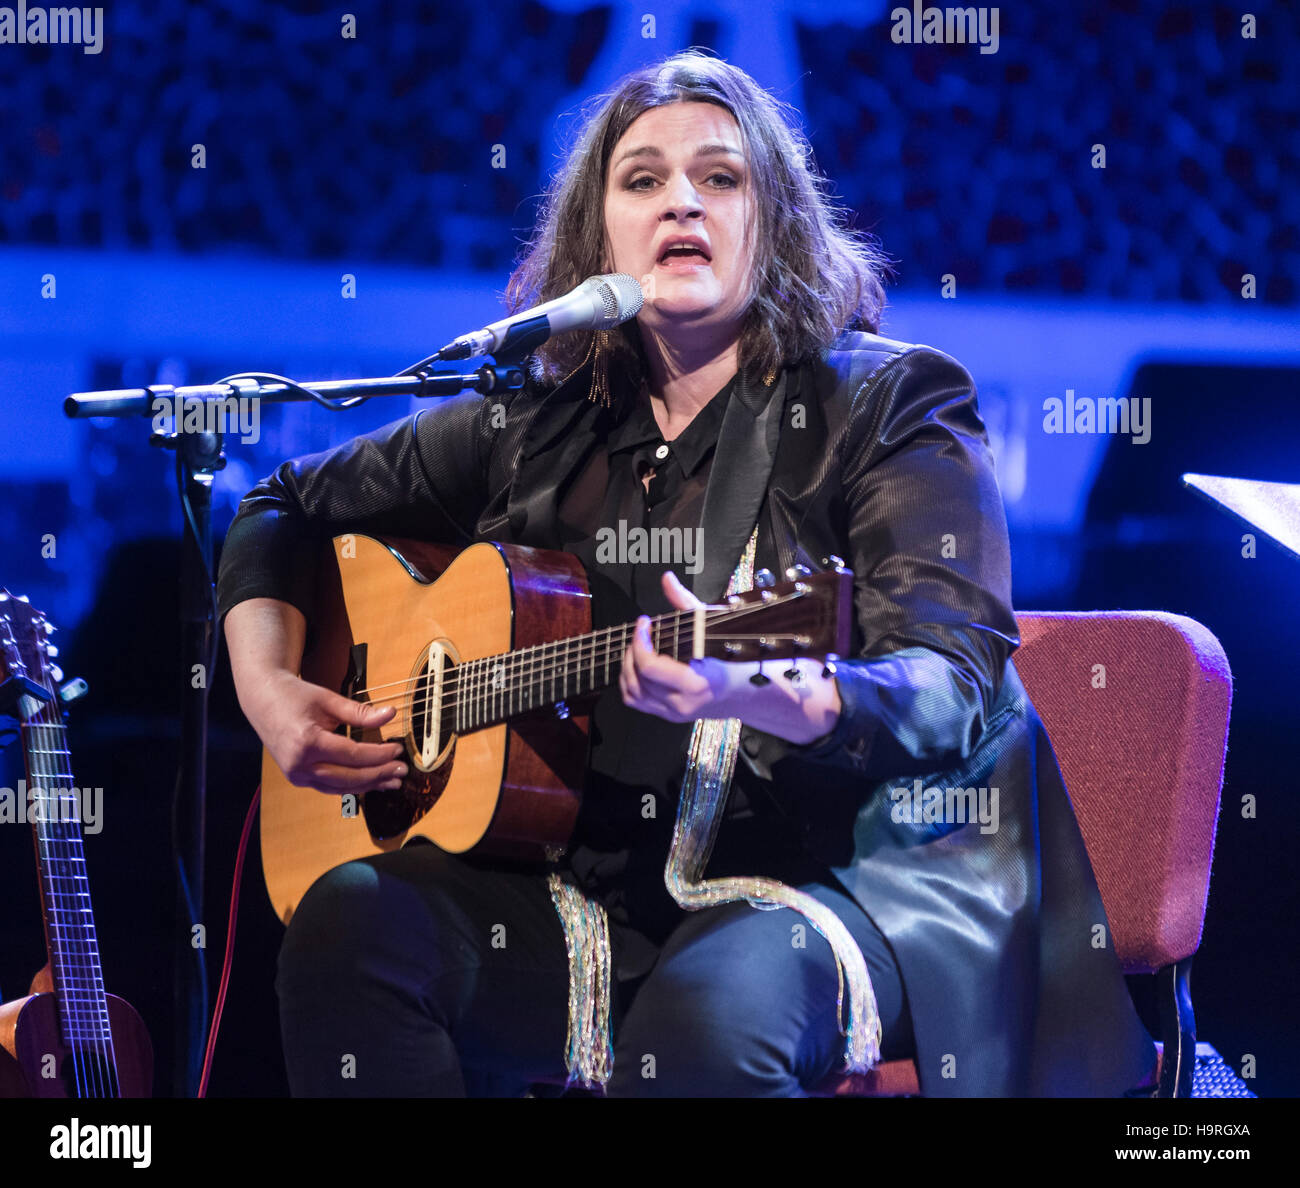 Barcelona, Spain. 25 November 2016. French-American jazz singer Madeleine Peyroux performs live on stage at Palau de la Musica during 2016 Voll-Damm Barcelona Jazz Festival. Credit:  Victor Puig/Alamy Live News Stock Photo